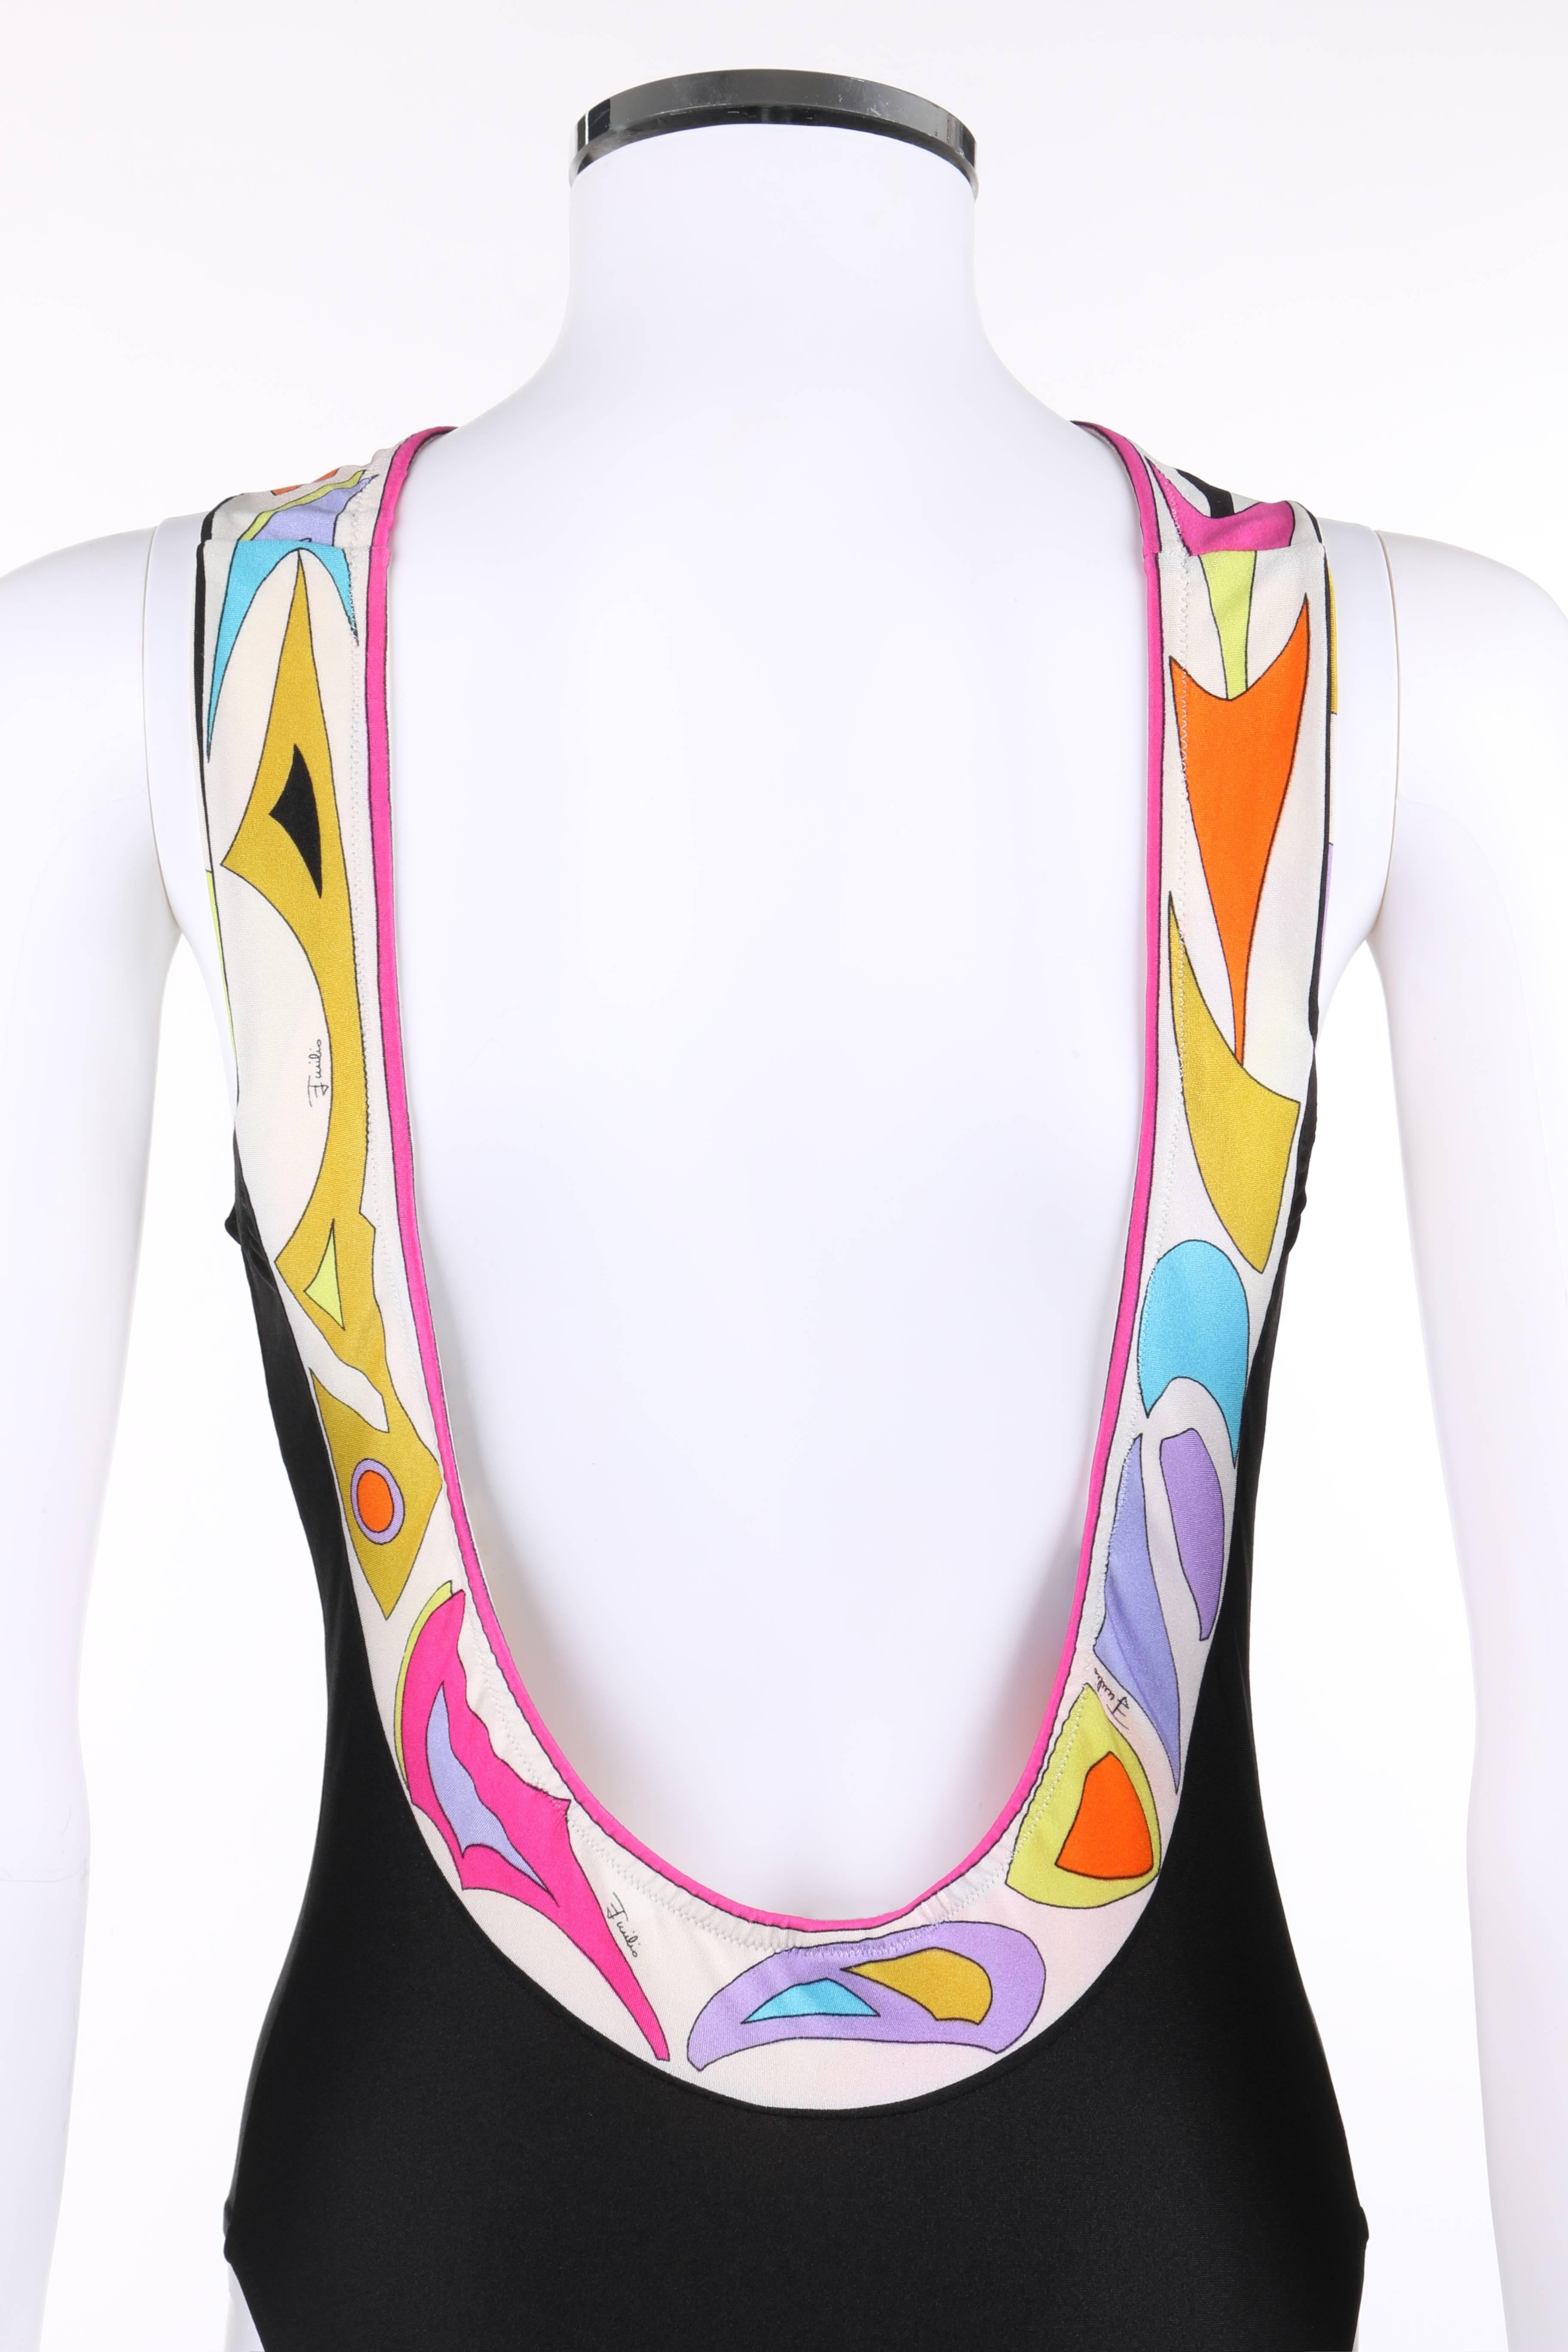 EMILIO PUCCI c.1970's Black Multicolor Abstract Boarder Print Bathing Swimsuit 2